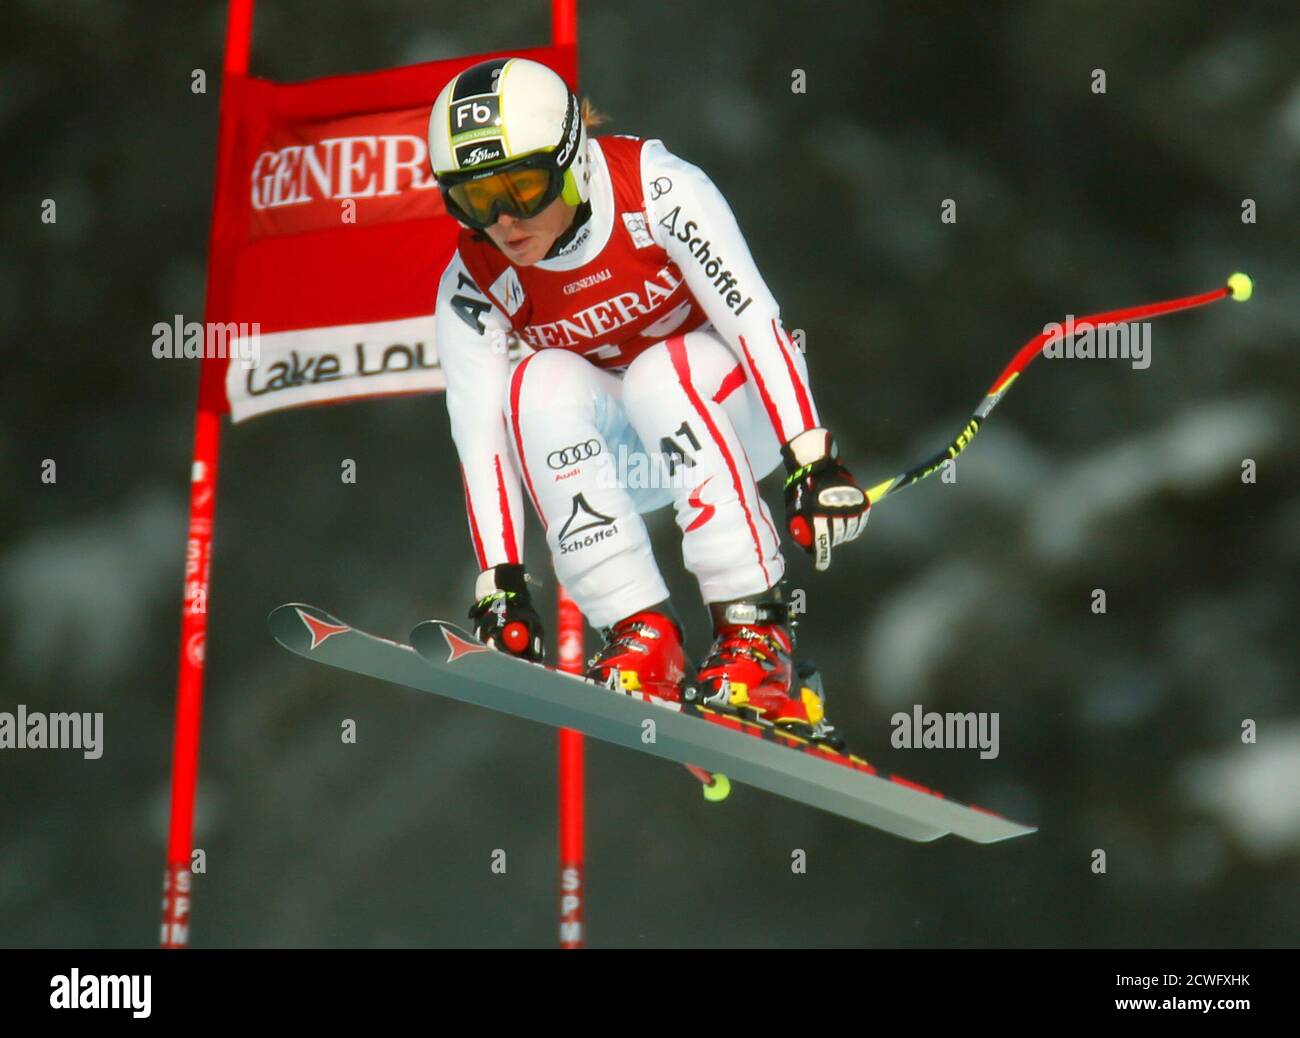 Nicole Schmidhofer of Austria takes air during alpine skiing training for the Women's World Cup Downhill in Lake Louise, Alberta, November 27, 2012.  REUTERS/Mike Blake  (CANADA - Tags: SPORT SKIING) Stock Photo